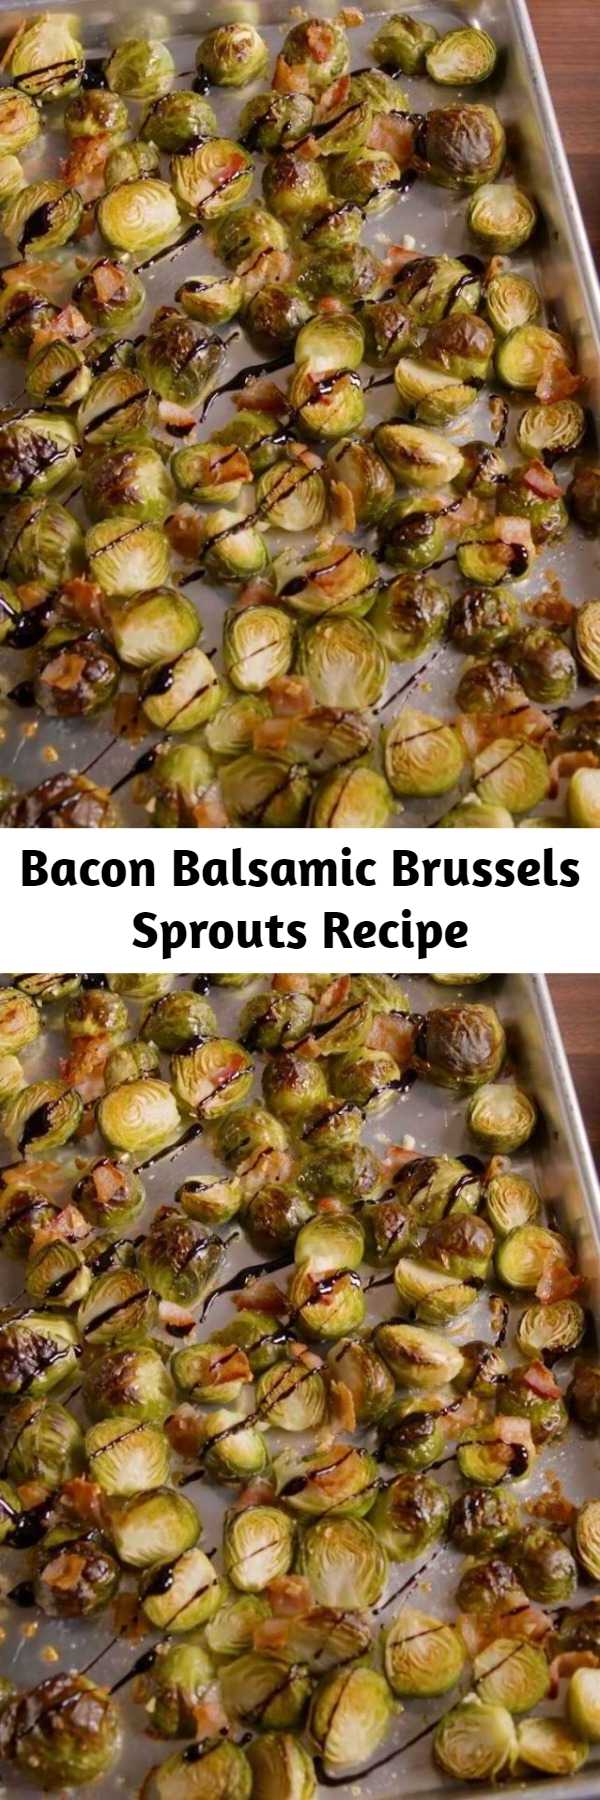 Bacon Balsamic Brussels Sprouts Recipe - These Brussels sprouts are easy enough to make on a weeknight but fancy enough to serve at a dinner party. Instead of roasting the sprouts with balsamic vinegar (which would make them soggy and mushy) we make a simple balsamic glaze to garnish them with. #easy #recipe #Brusselsprouts #brussels #bacon #Balsamic #glaze #roasted #vegetarian #crispy #honey